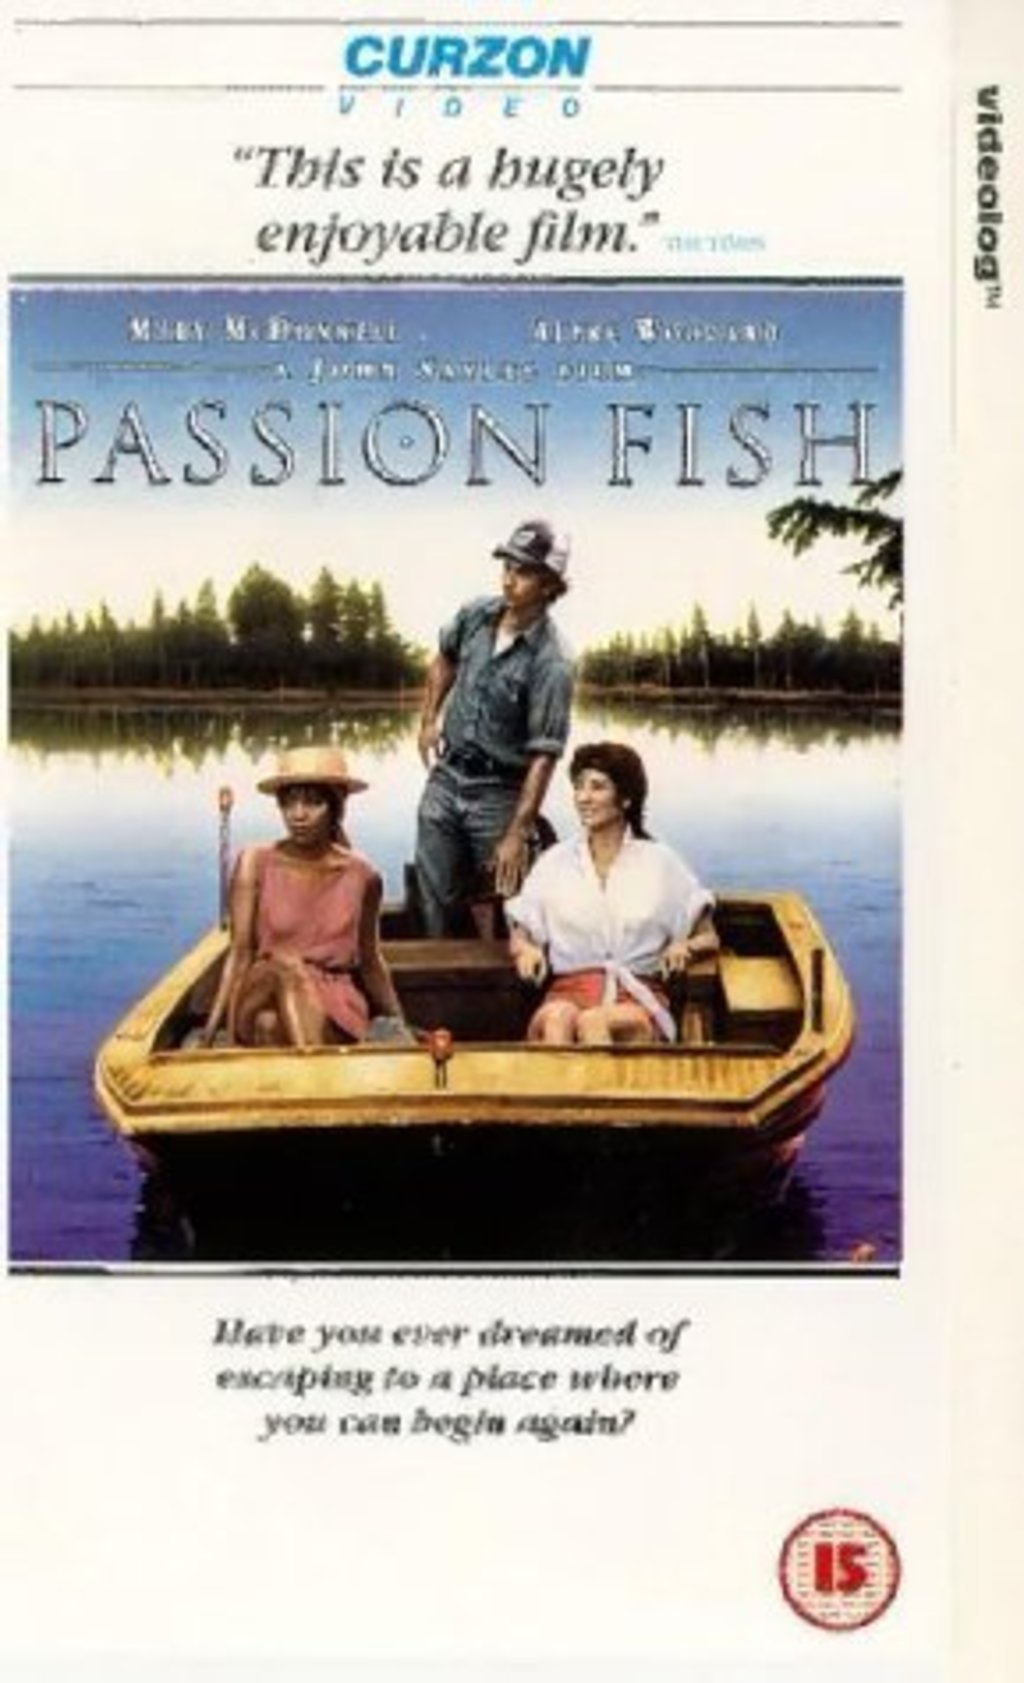 Watch Passion Fish on Netflix Today!